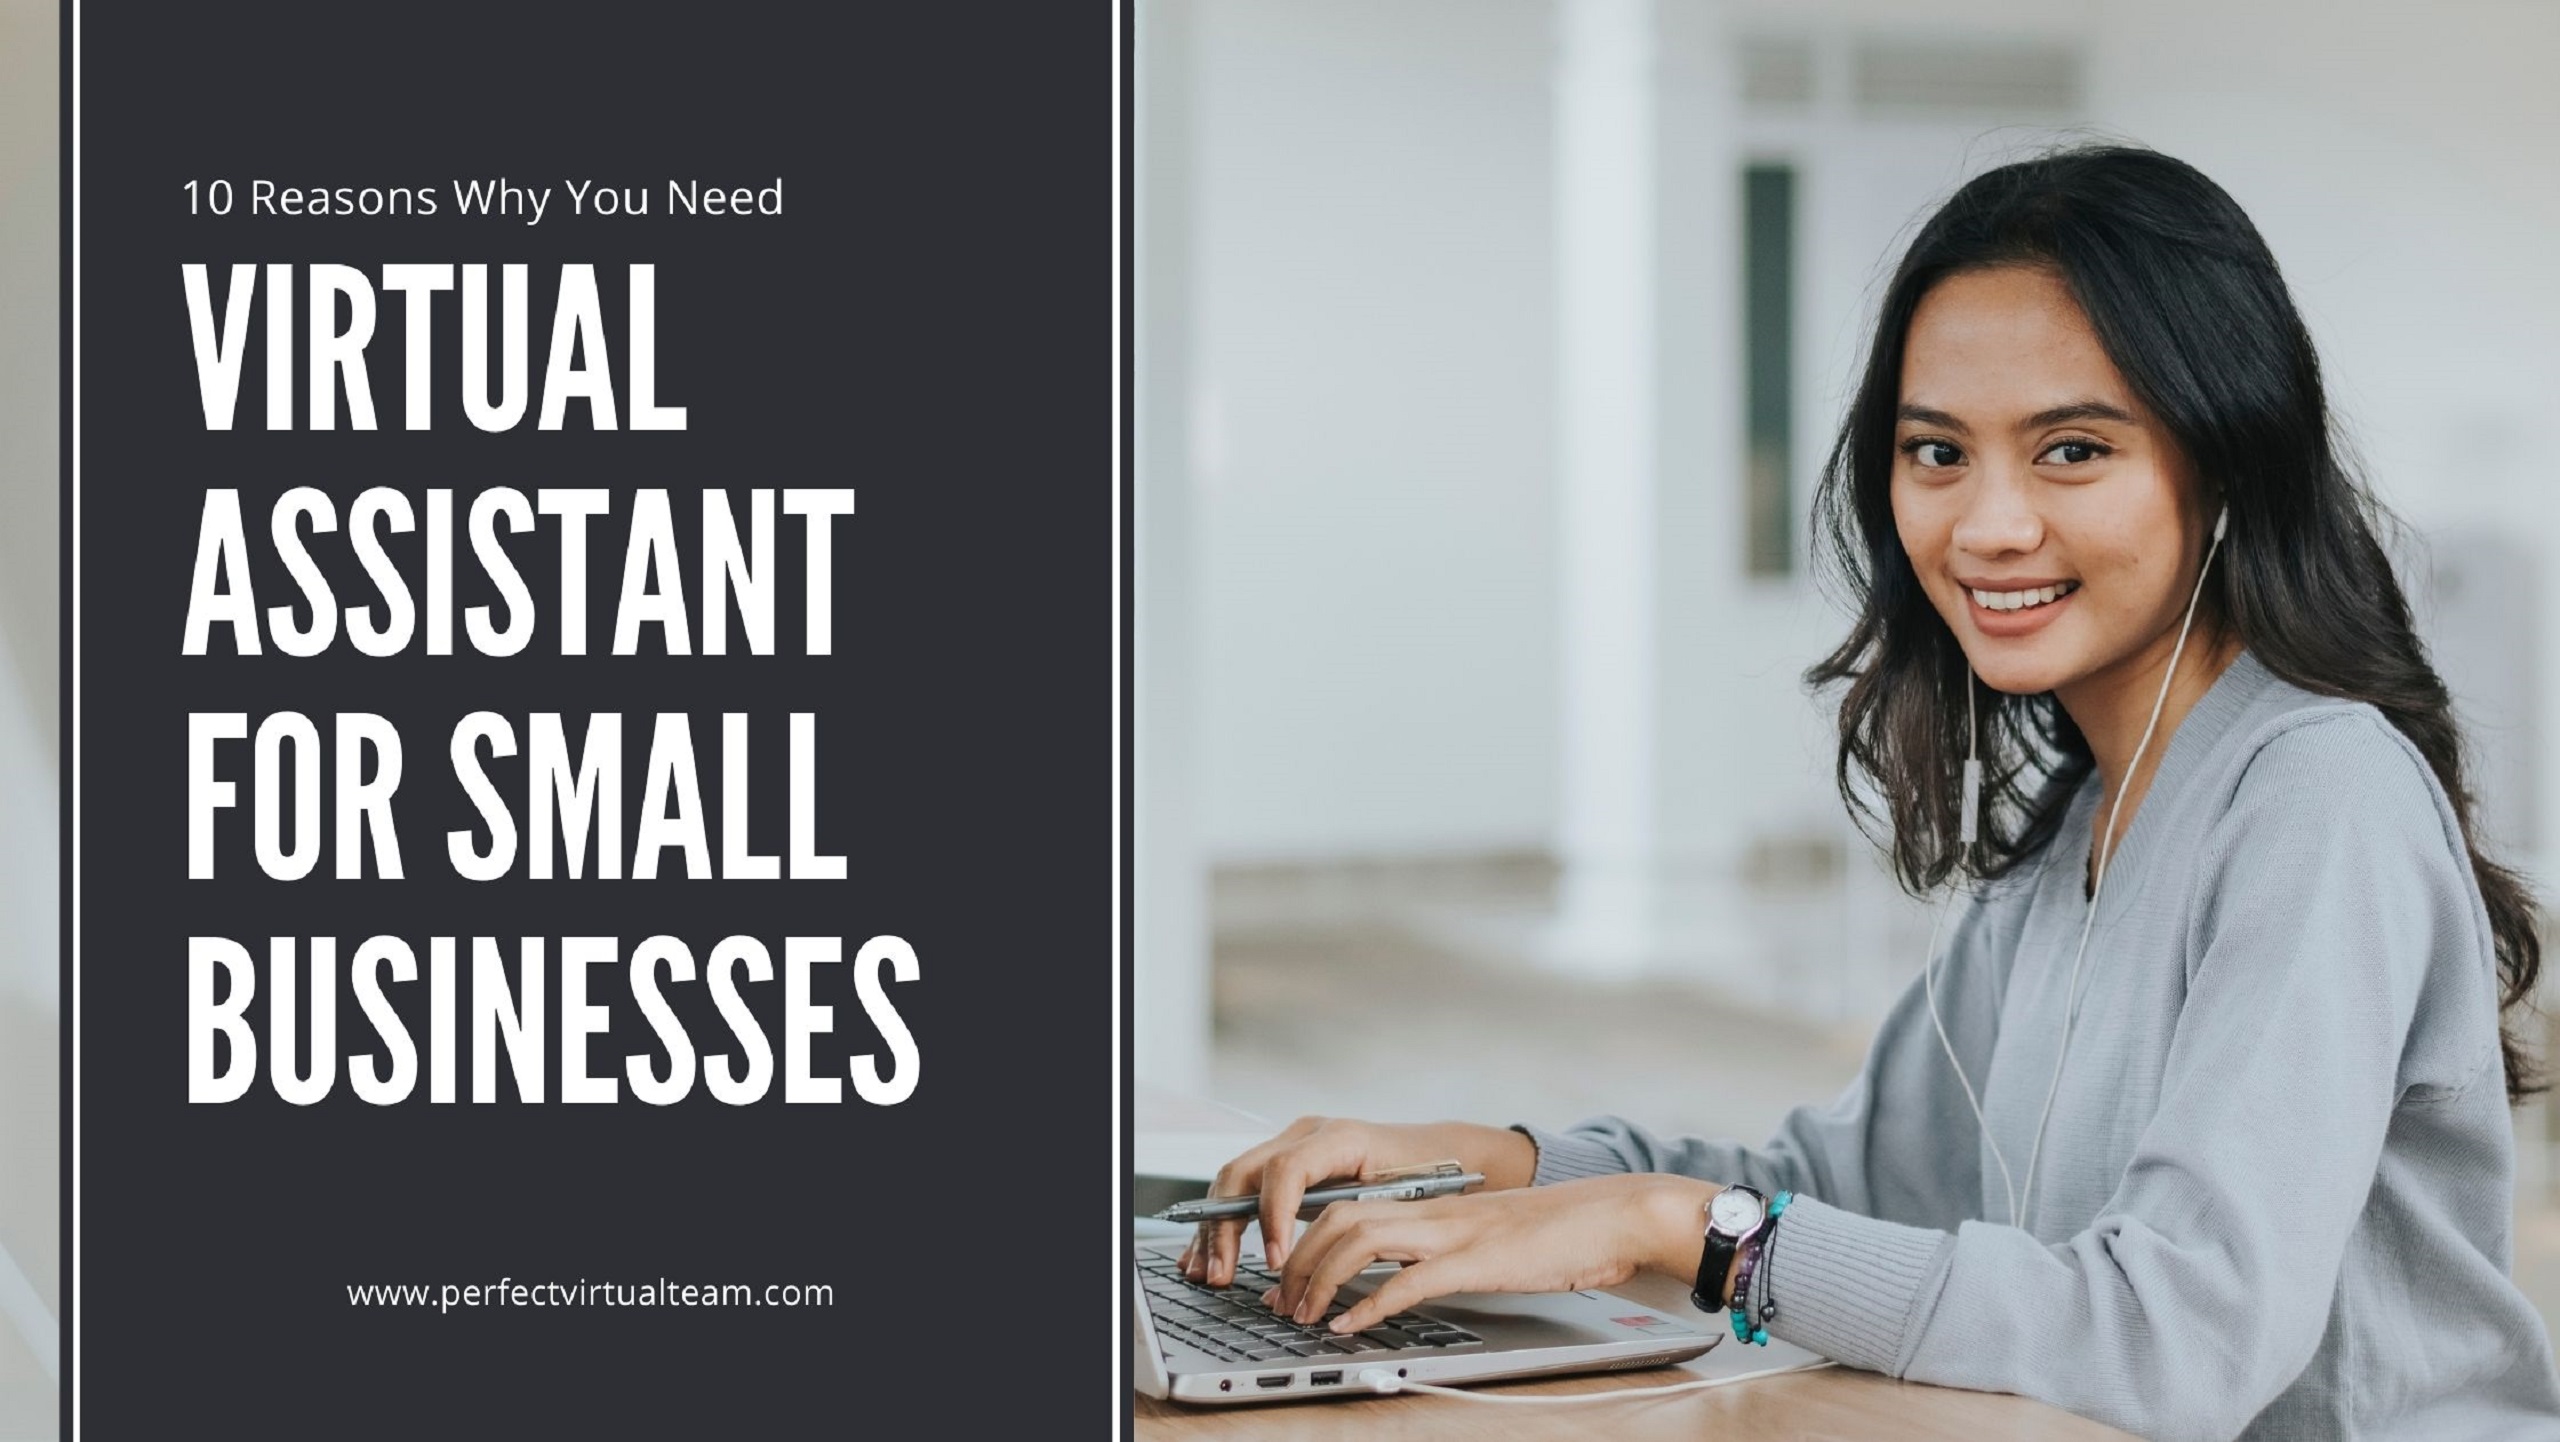 Virtual Assistant for Small Businesses